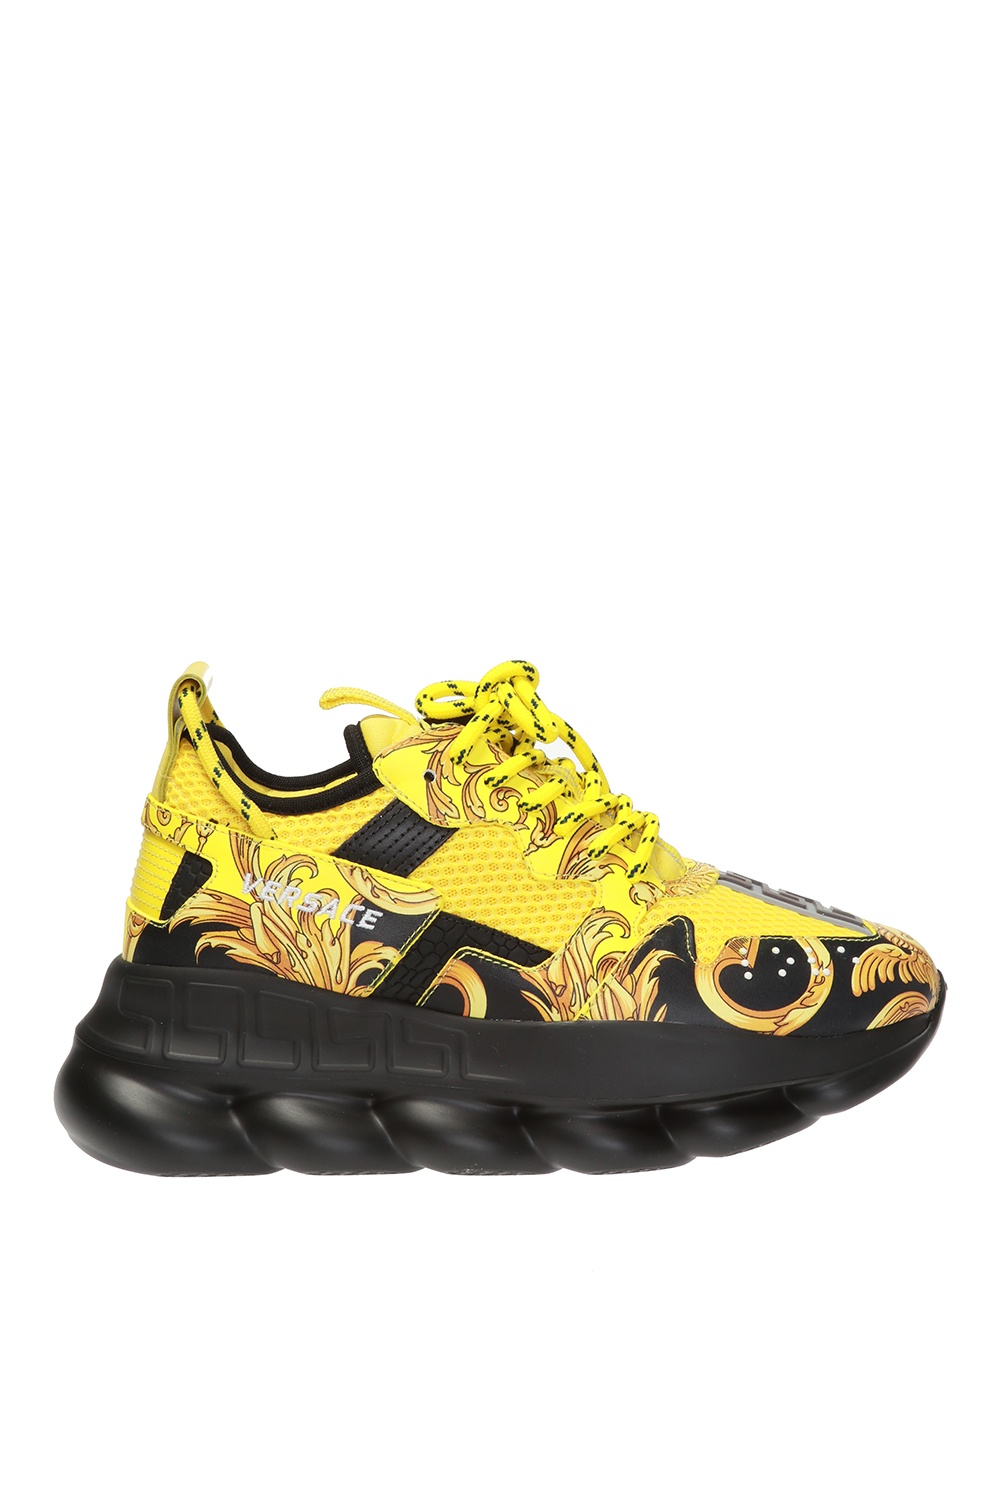 versace chain reaction black and gold